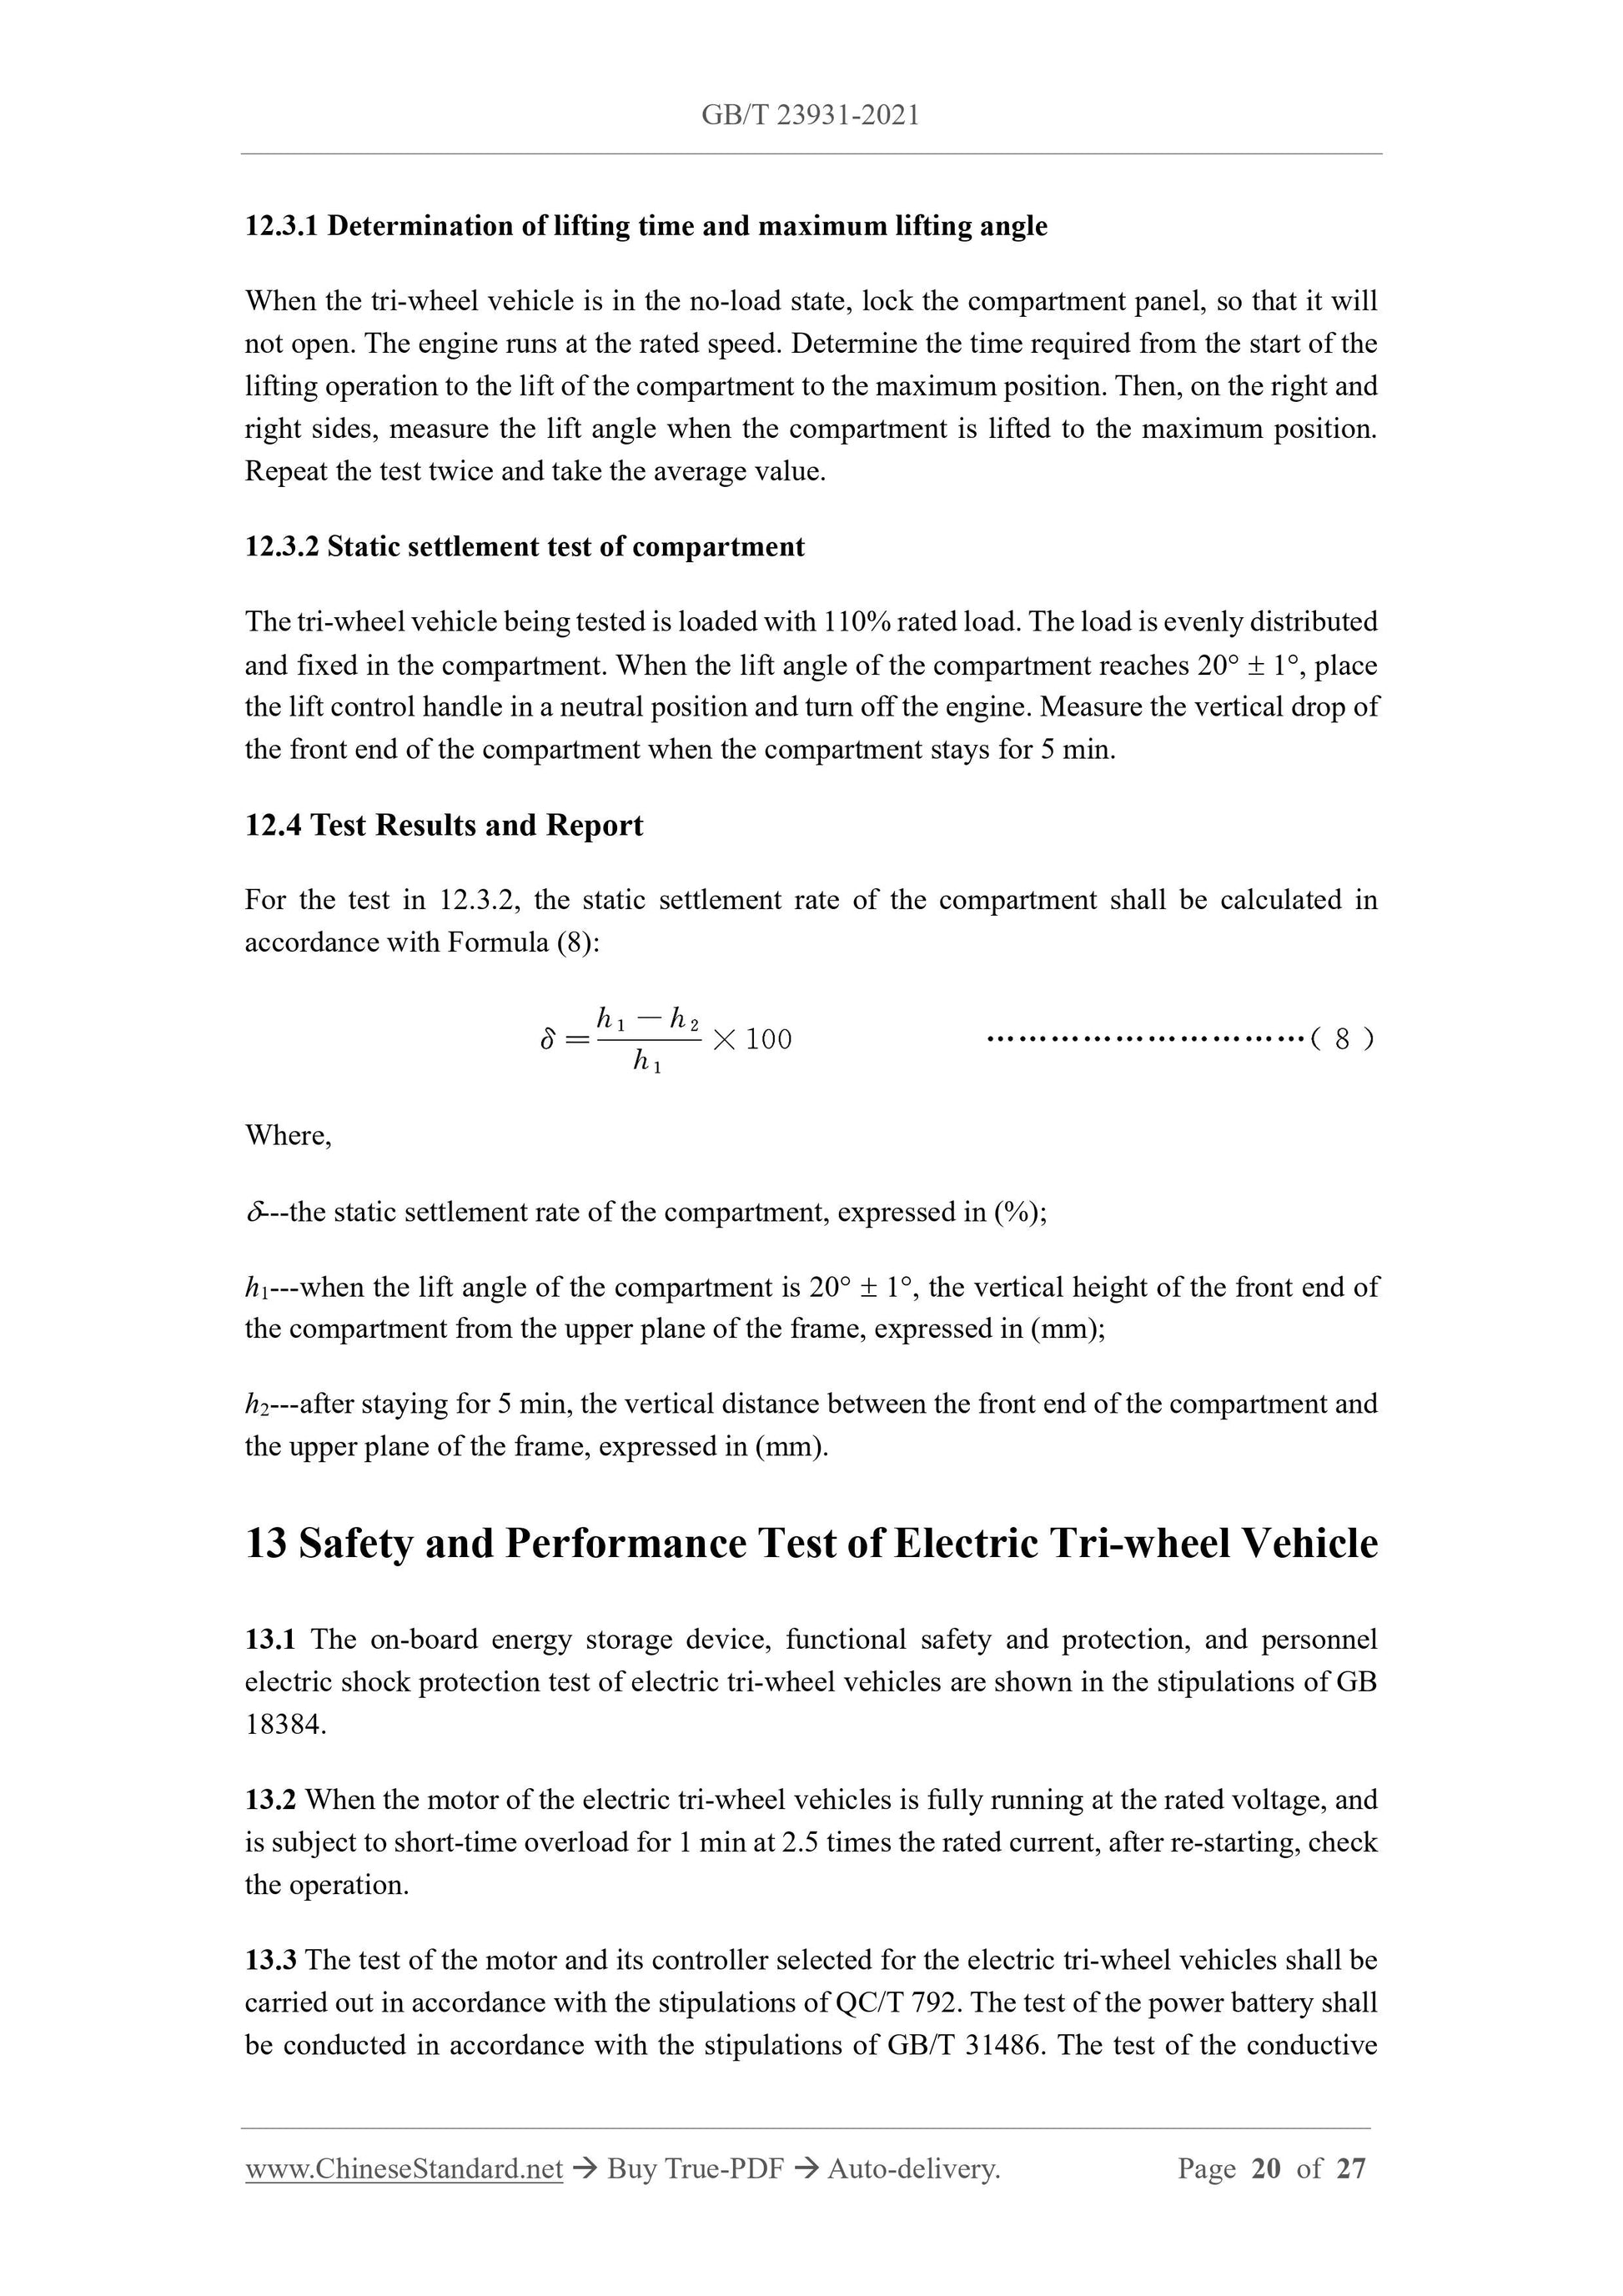 GB/T 23931-2021 Page 8